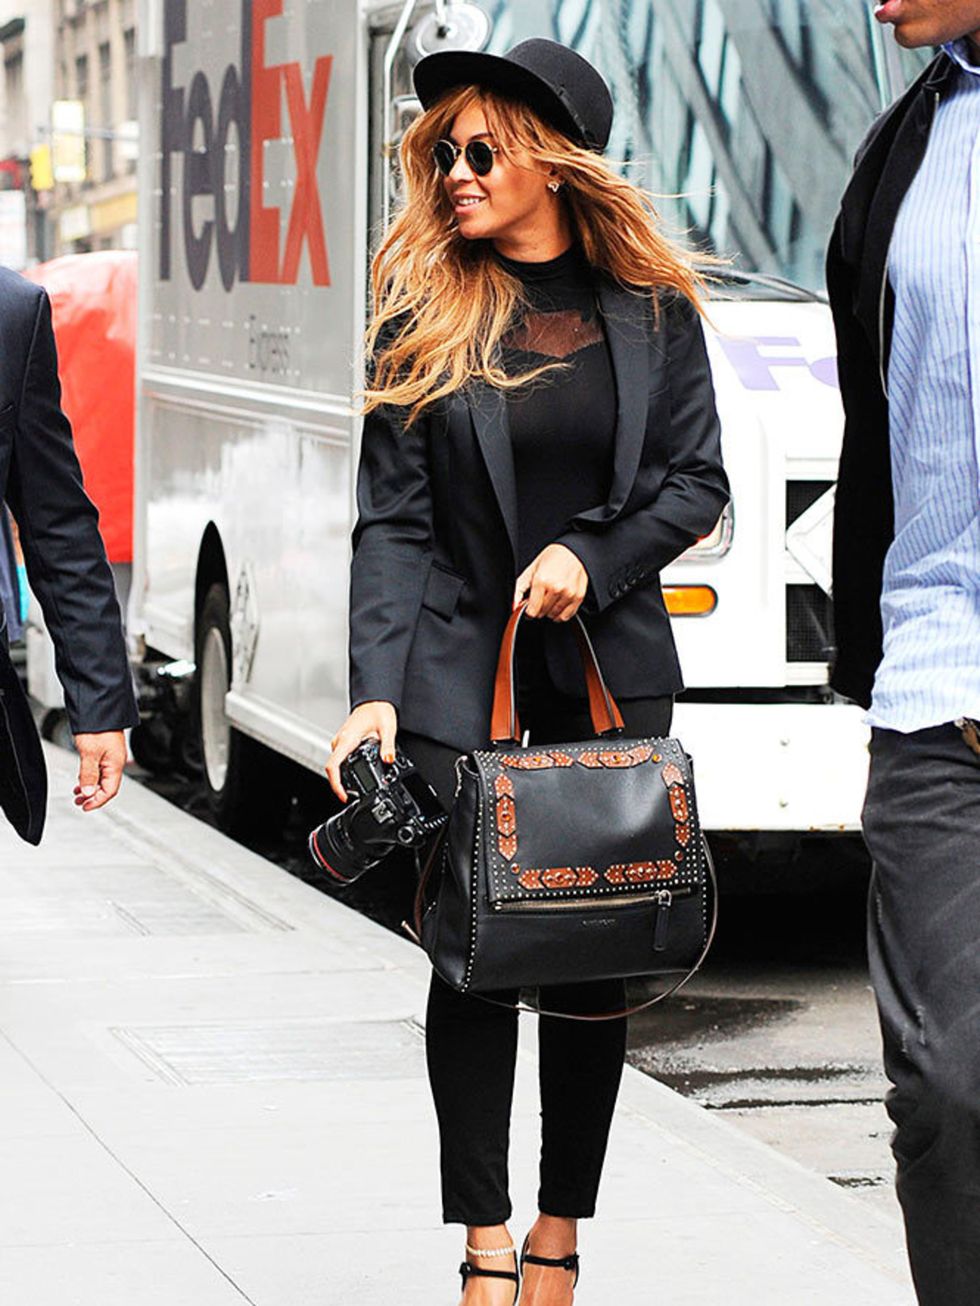 Beyonce steps out in New York wearing an all black outfit and carrying her new Givenchy bag, July 2015.